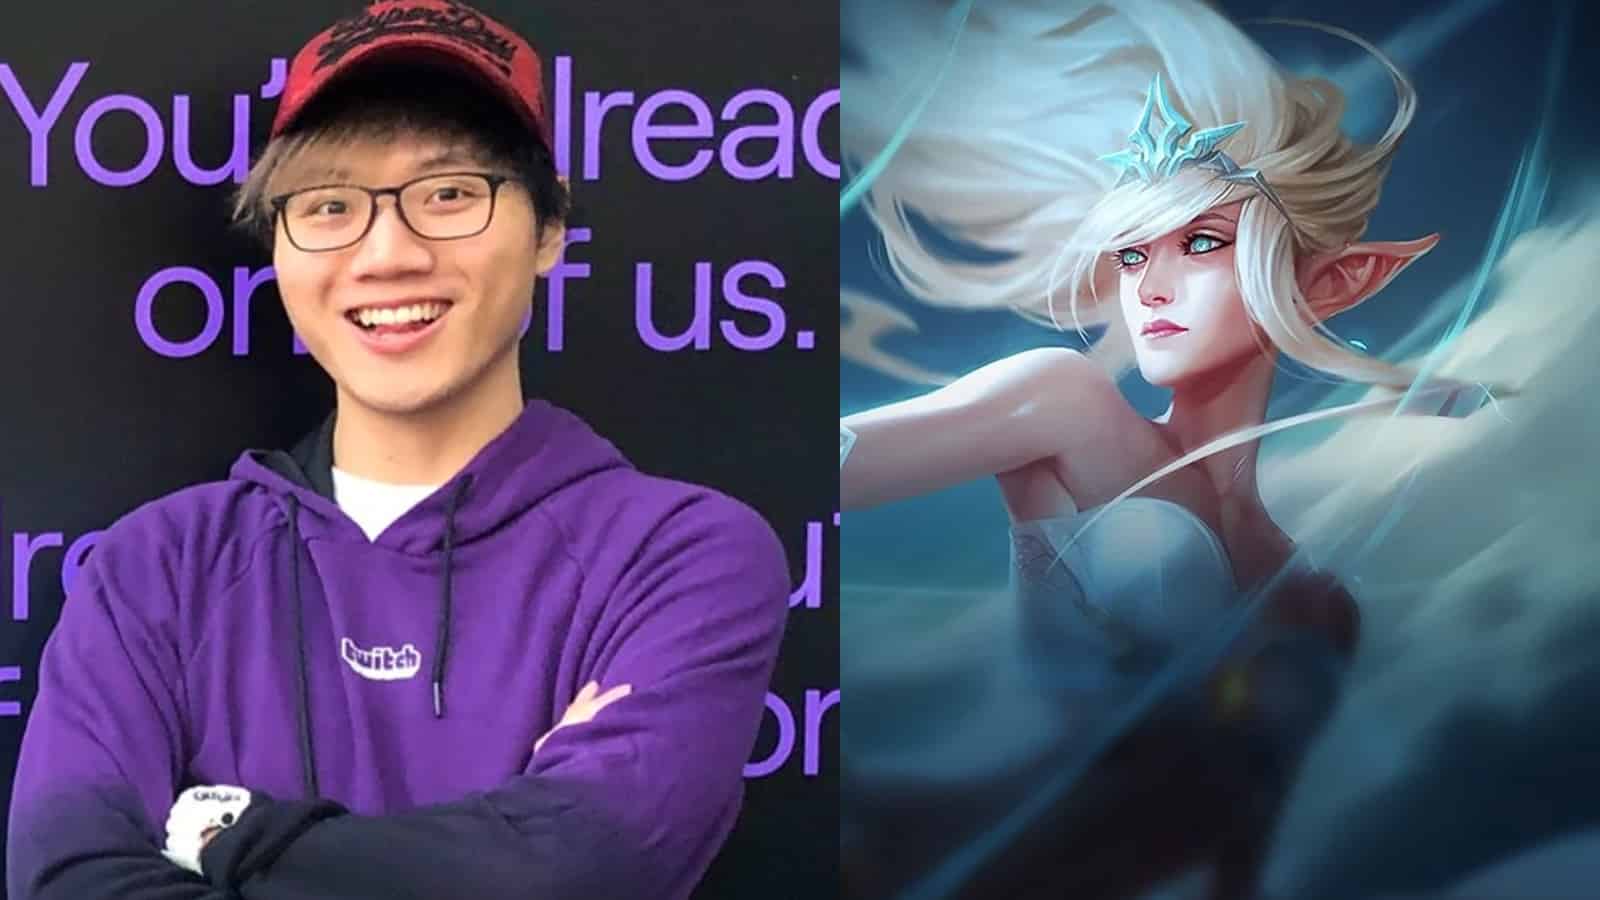 BoxBox programs AI to support him in League of Legends via voice